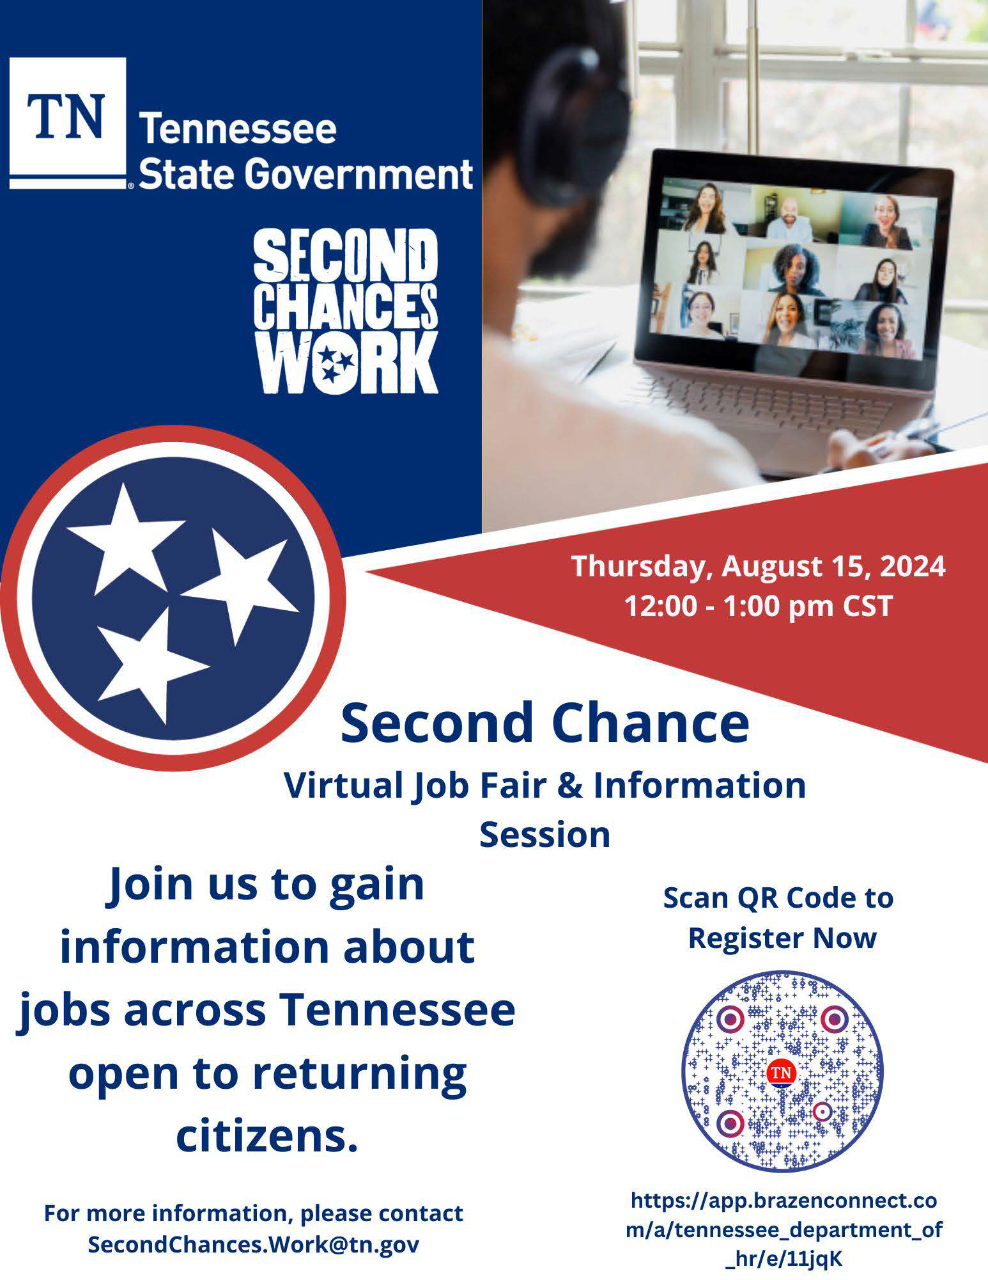 The Second Chance Virtual Job Fair is August 15, 2024, from noon to 1 p.m.